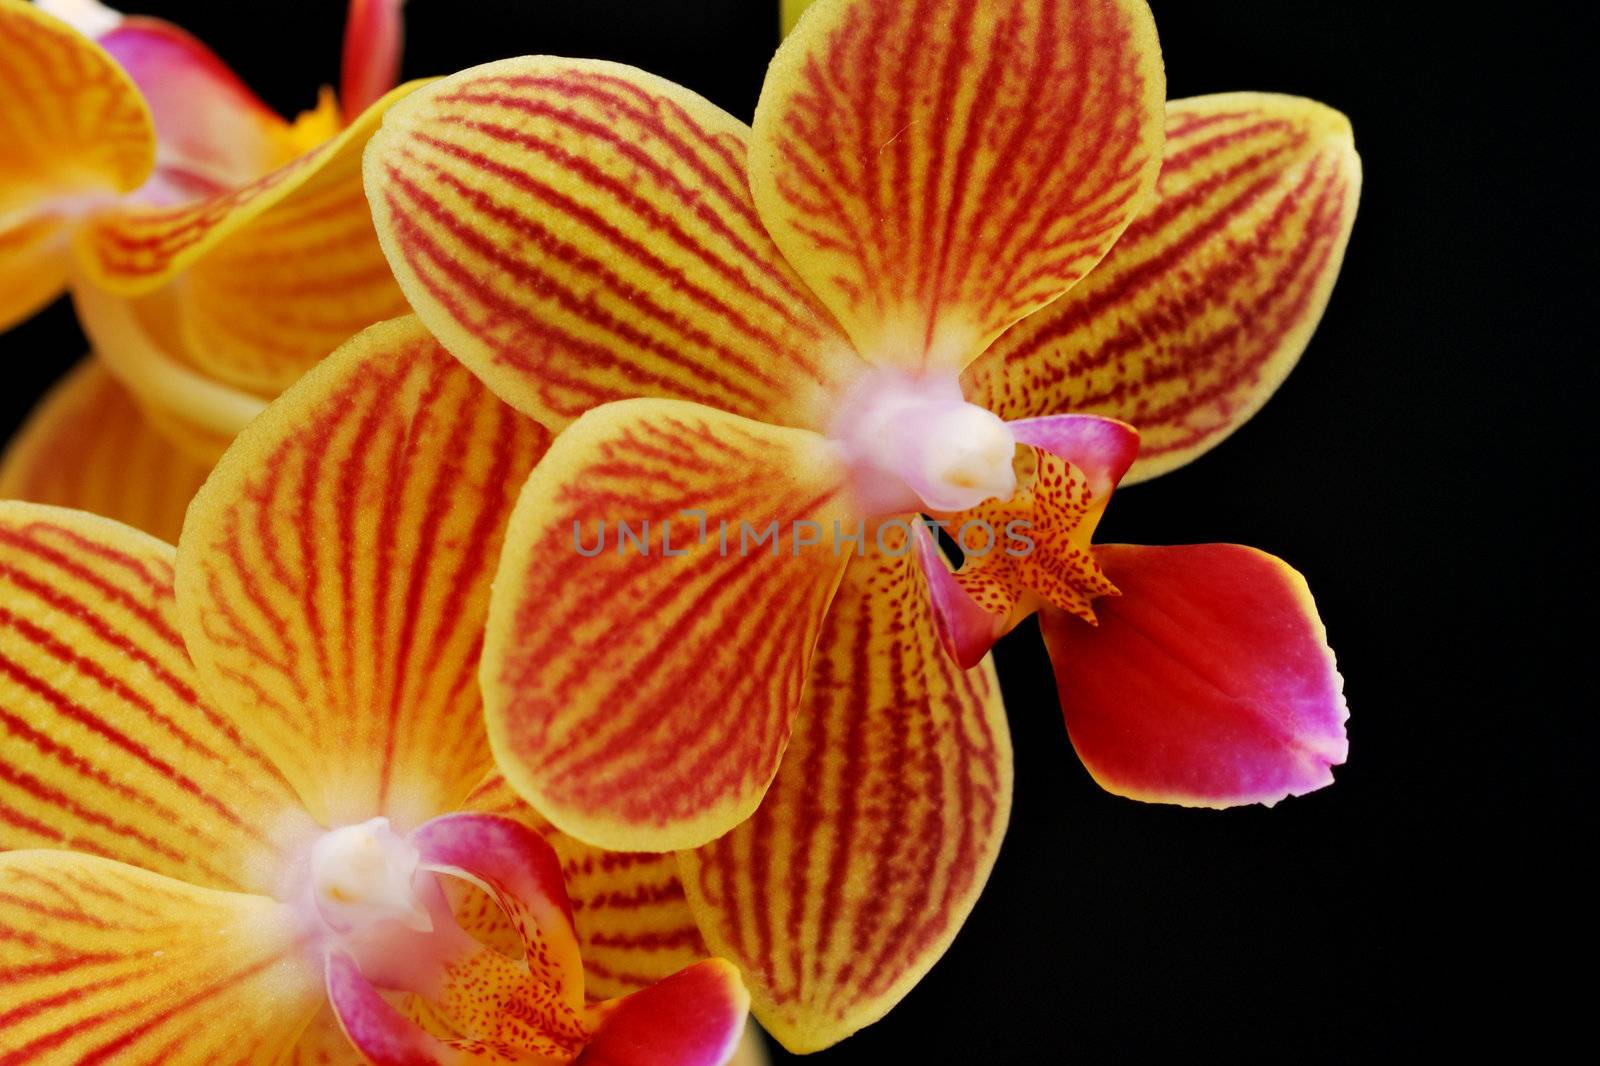 Orchid in close up with black background